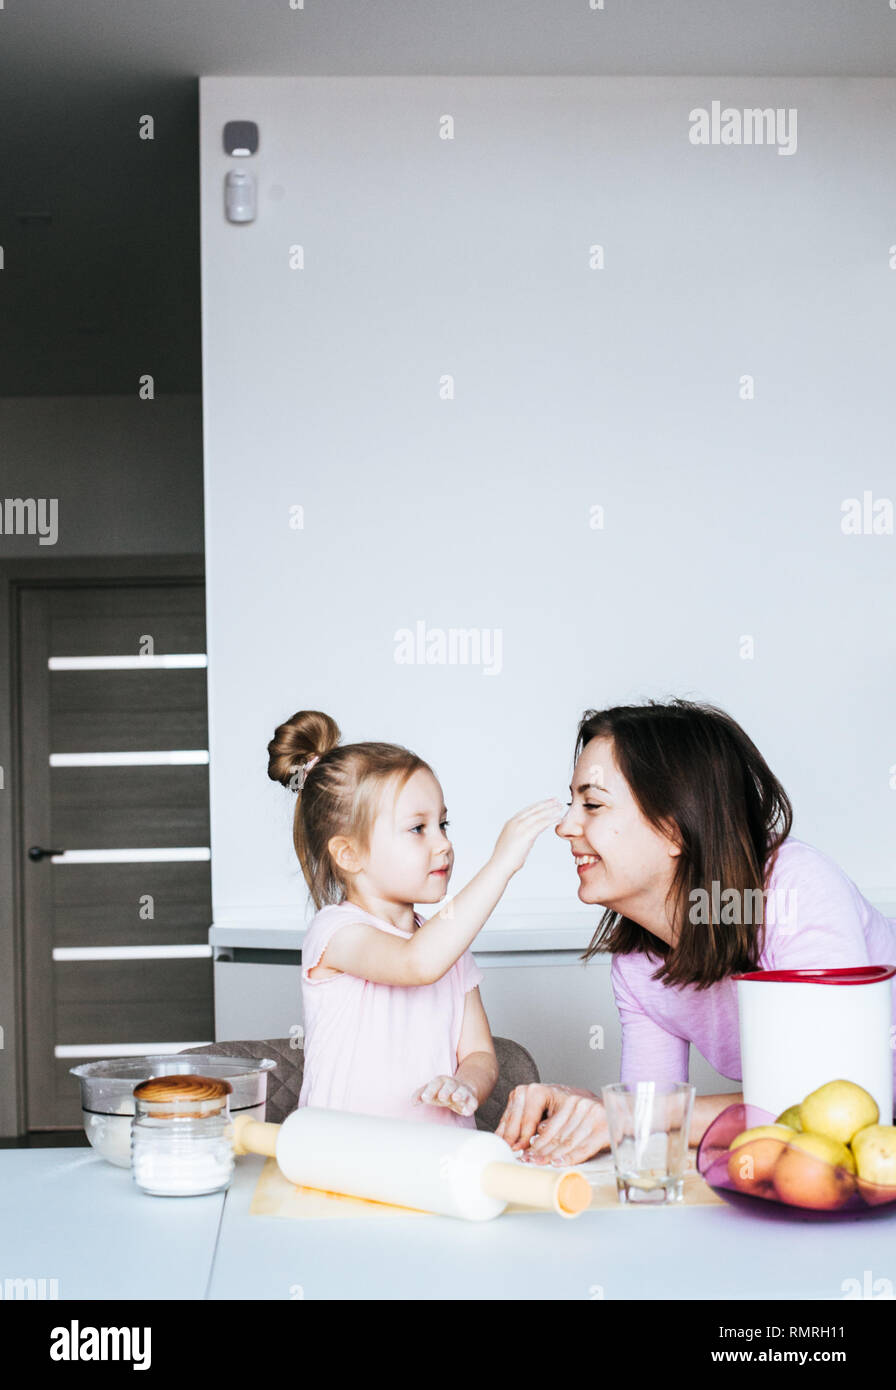 A mother and her daughter busy baking at home in the kitchen and having fun Stock Photo